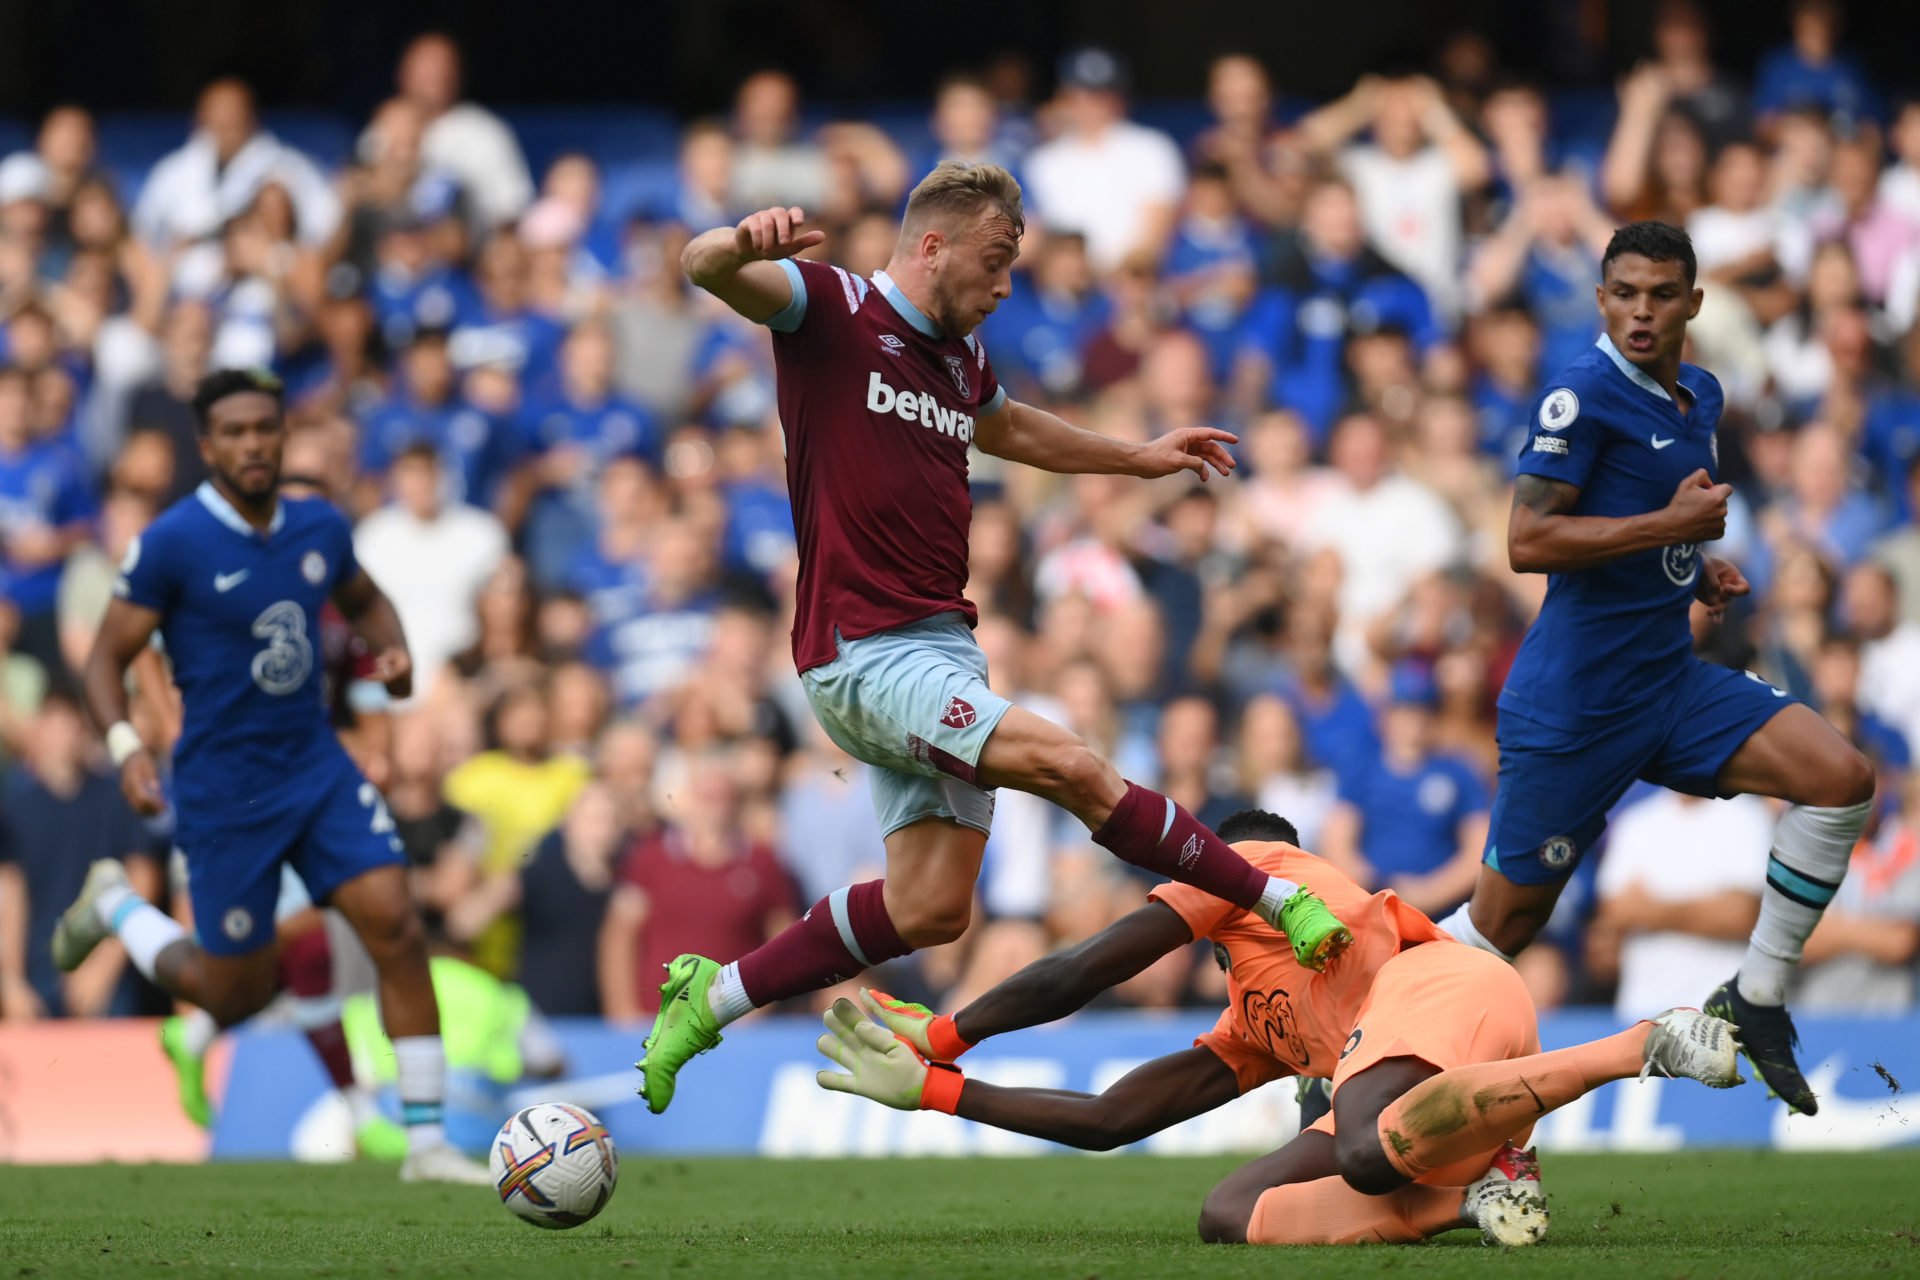 Thomas Tuchel has delivered his verdict on the farcical VAR decision during Chelsea vs West Ham